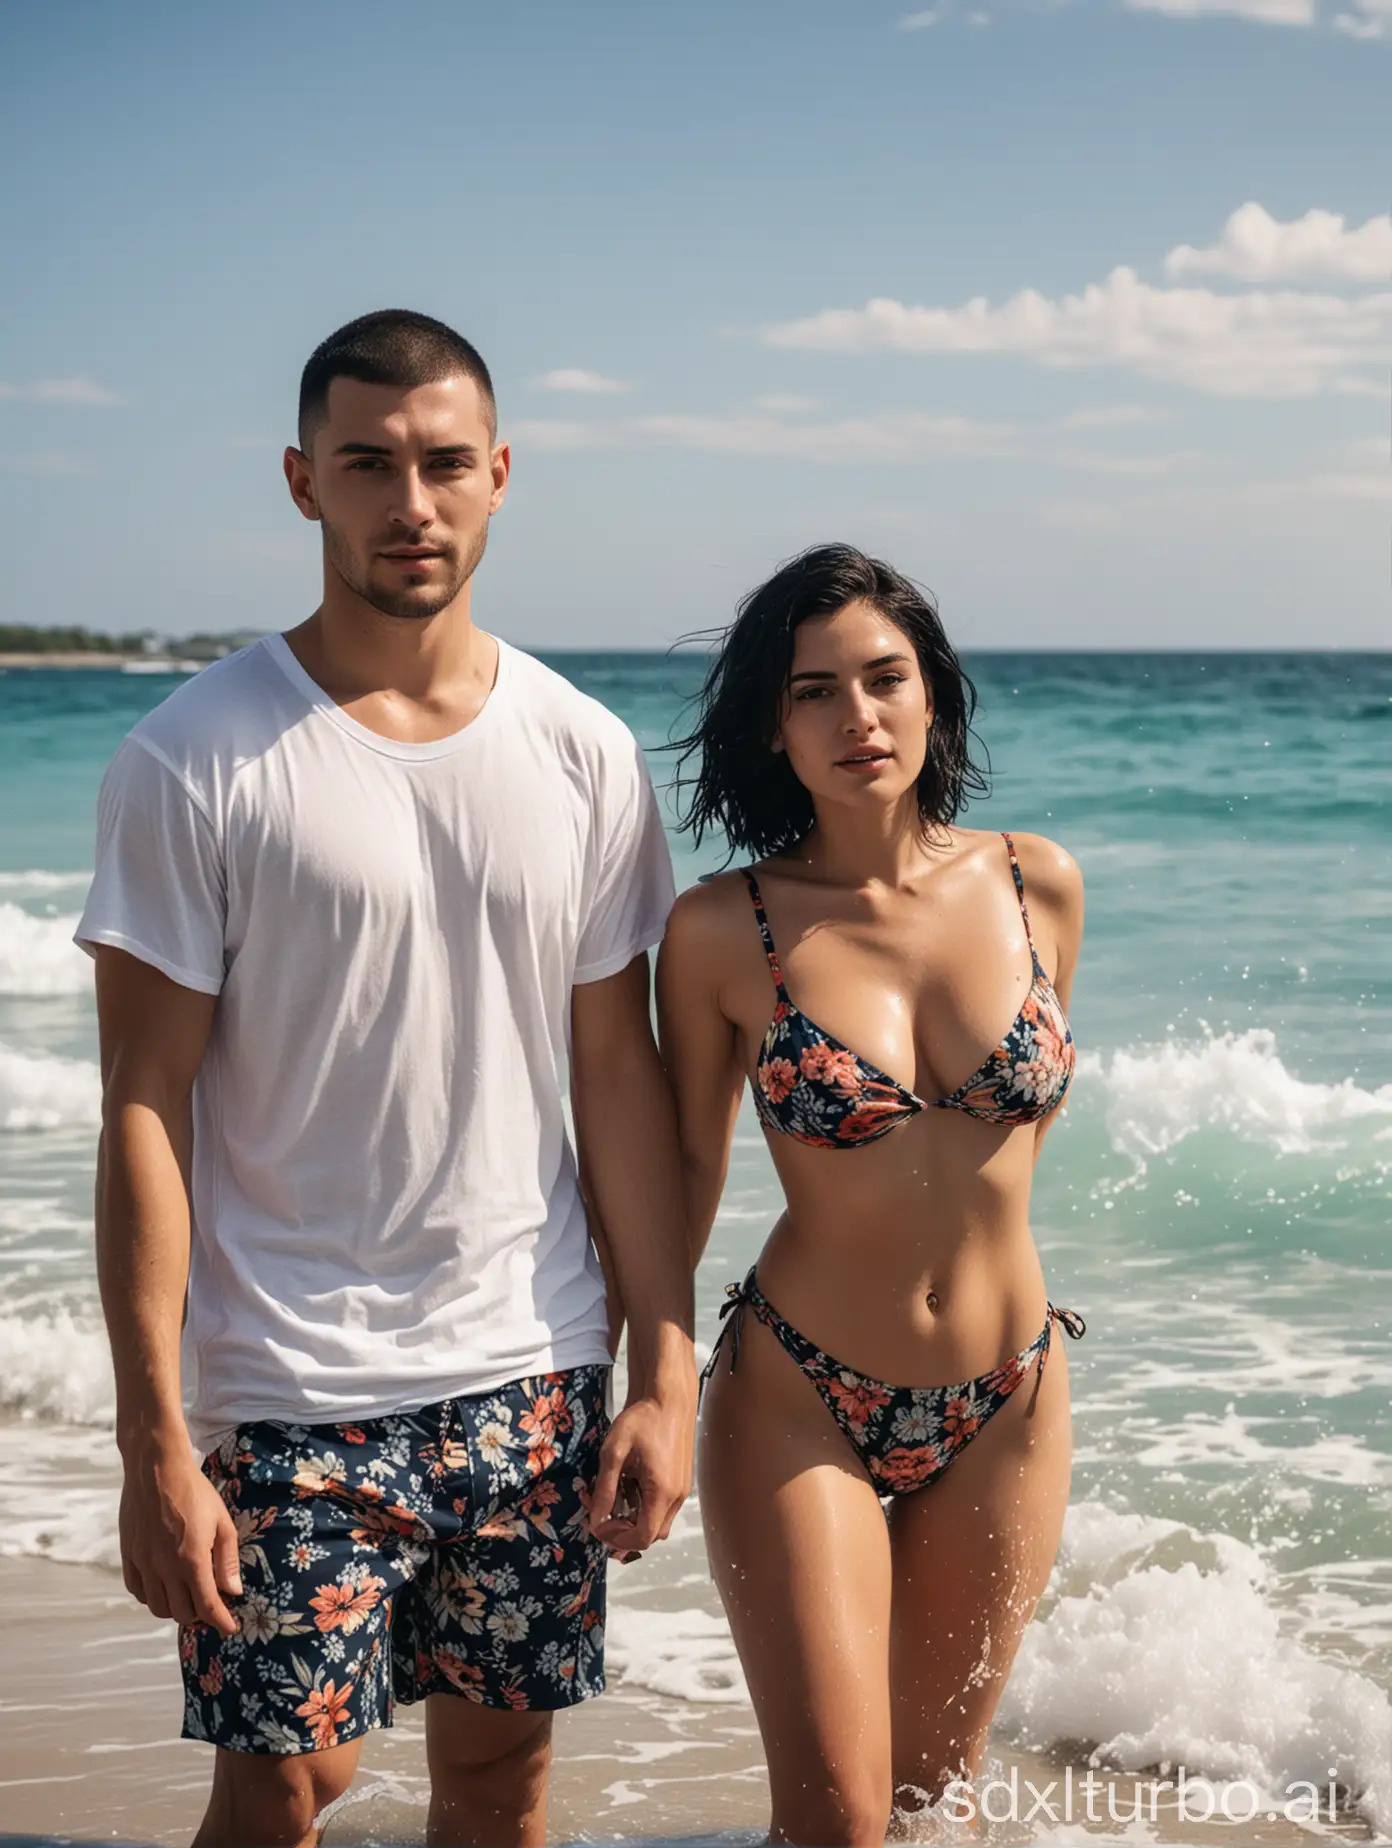 an young man and woman, man short black hair buzz cut, man wearing loose tshirt white, woman fat long black hair, woman wear tight floral bikini, big breasts, wearing beach shorts, looking front at the camera, on the beach(splashing water), blue sea water, white skin, FHD quality(8k), couple romantic, remote island